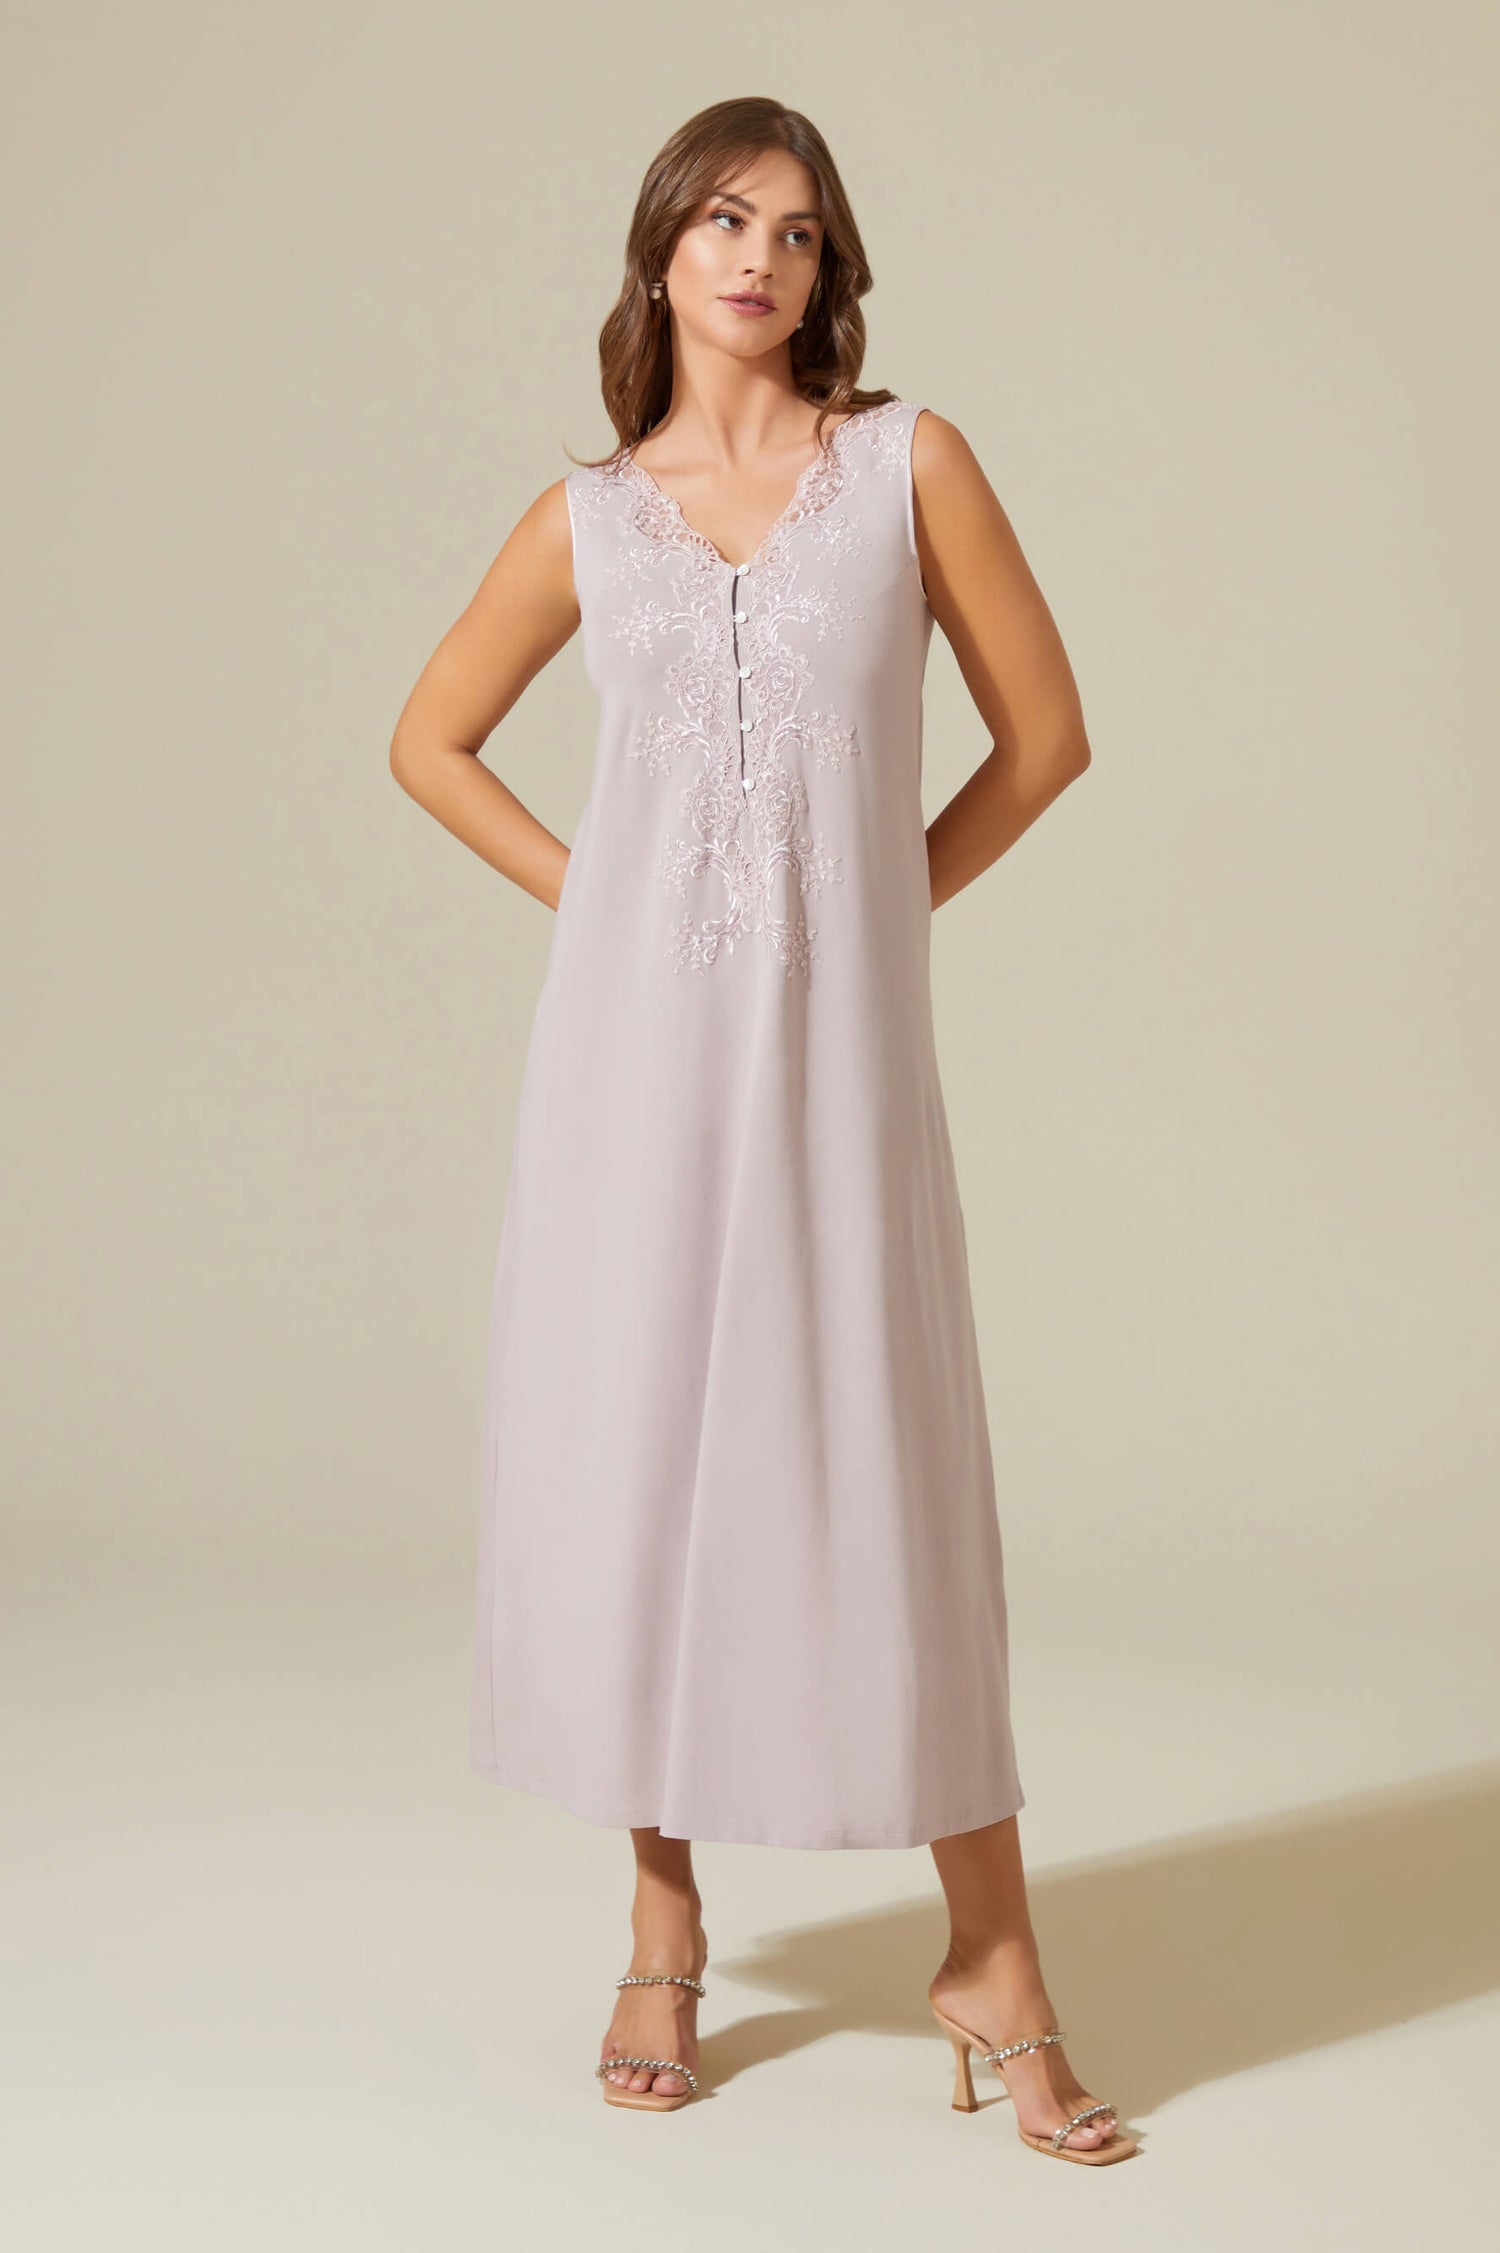 Luna Long Trimmed and Buttoned Cotton Nightgown - Powder on Powder